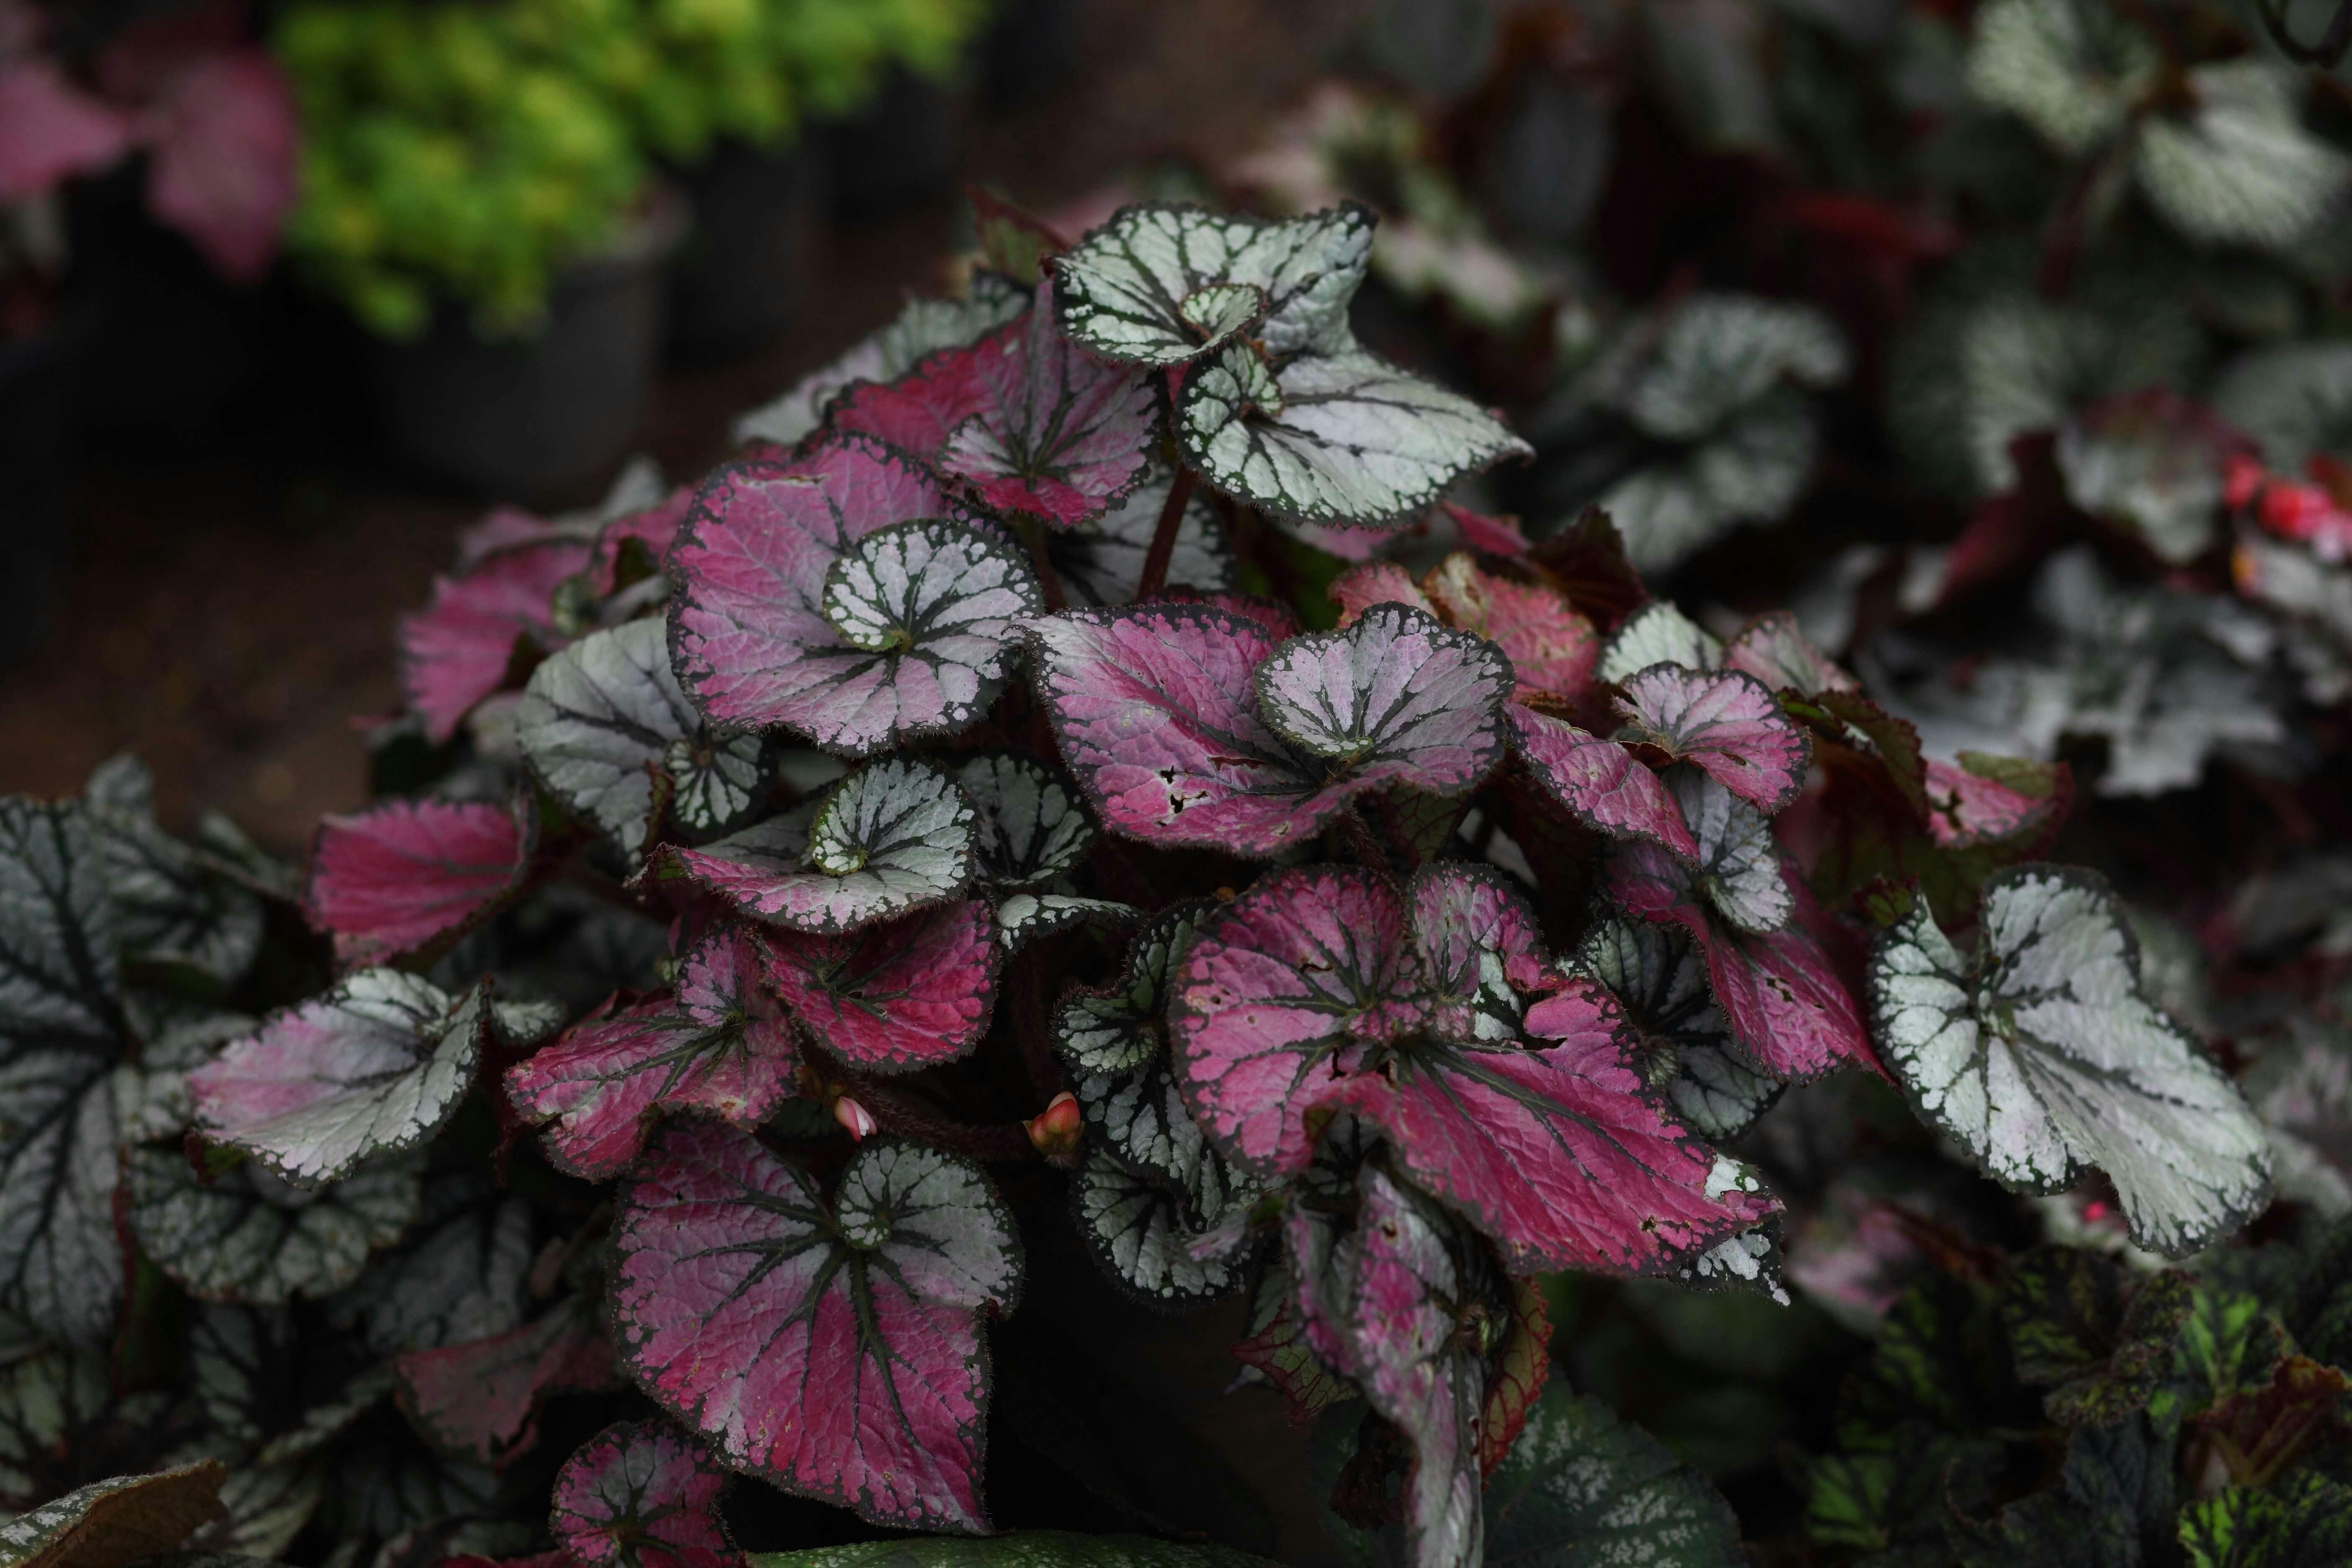 Rex begonias with beautiful violet and silver foliage.